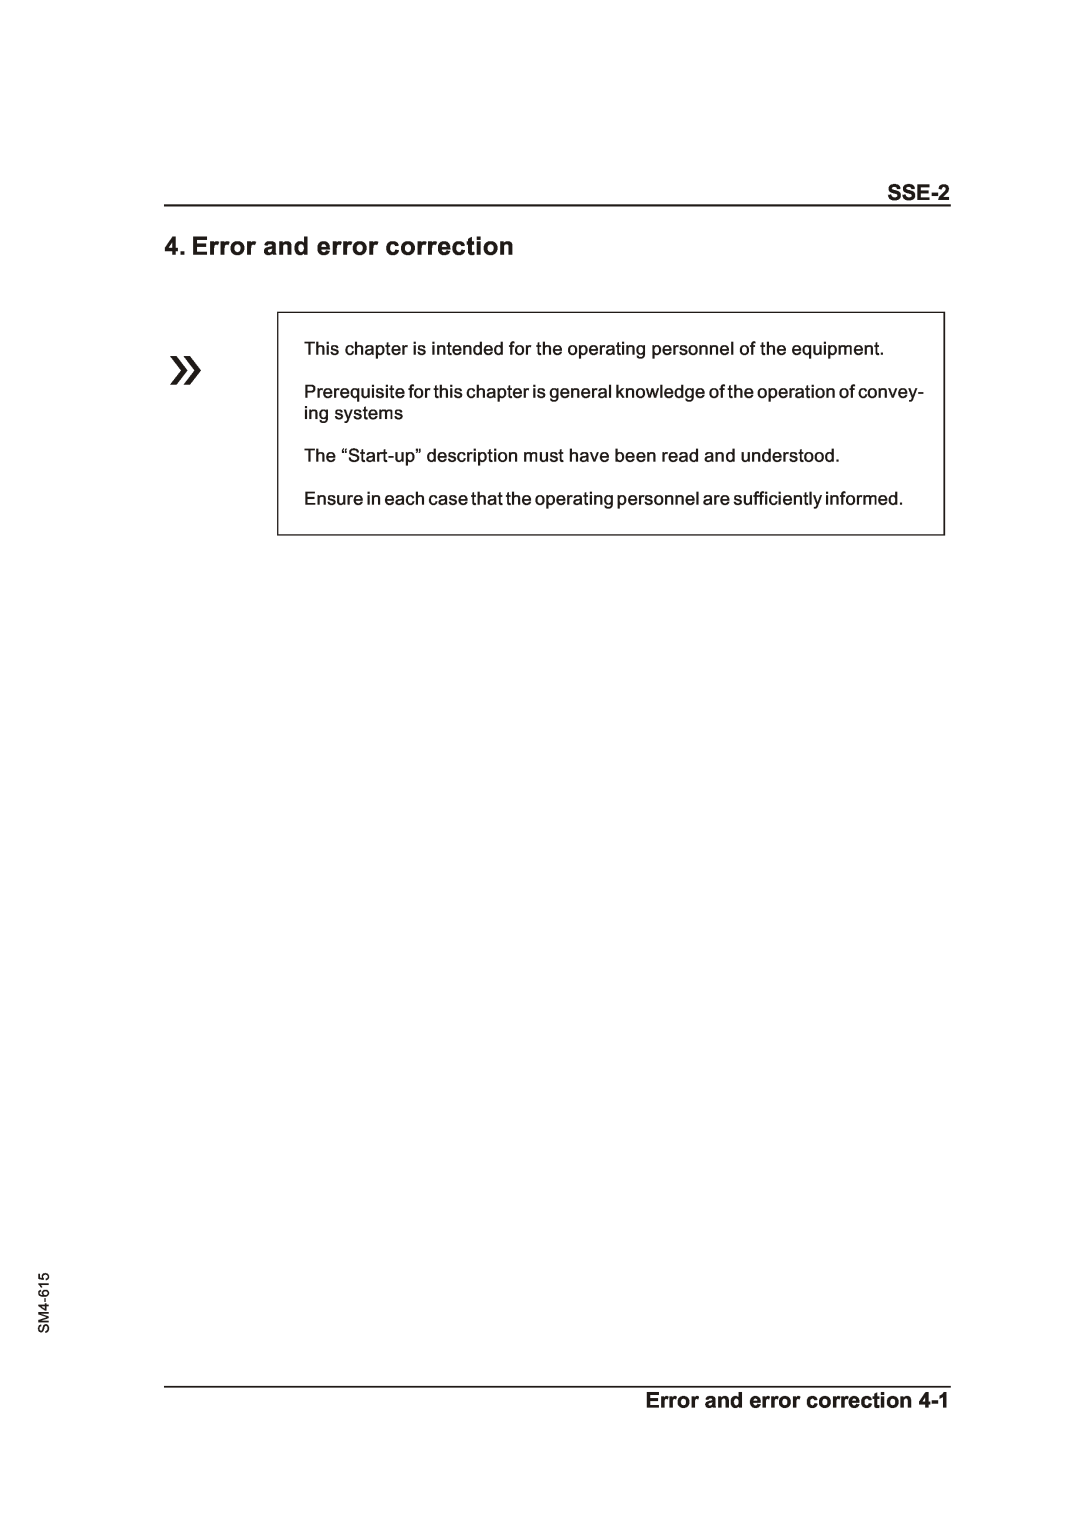 Sterling SSE-2 operating instructions Error and error correction 